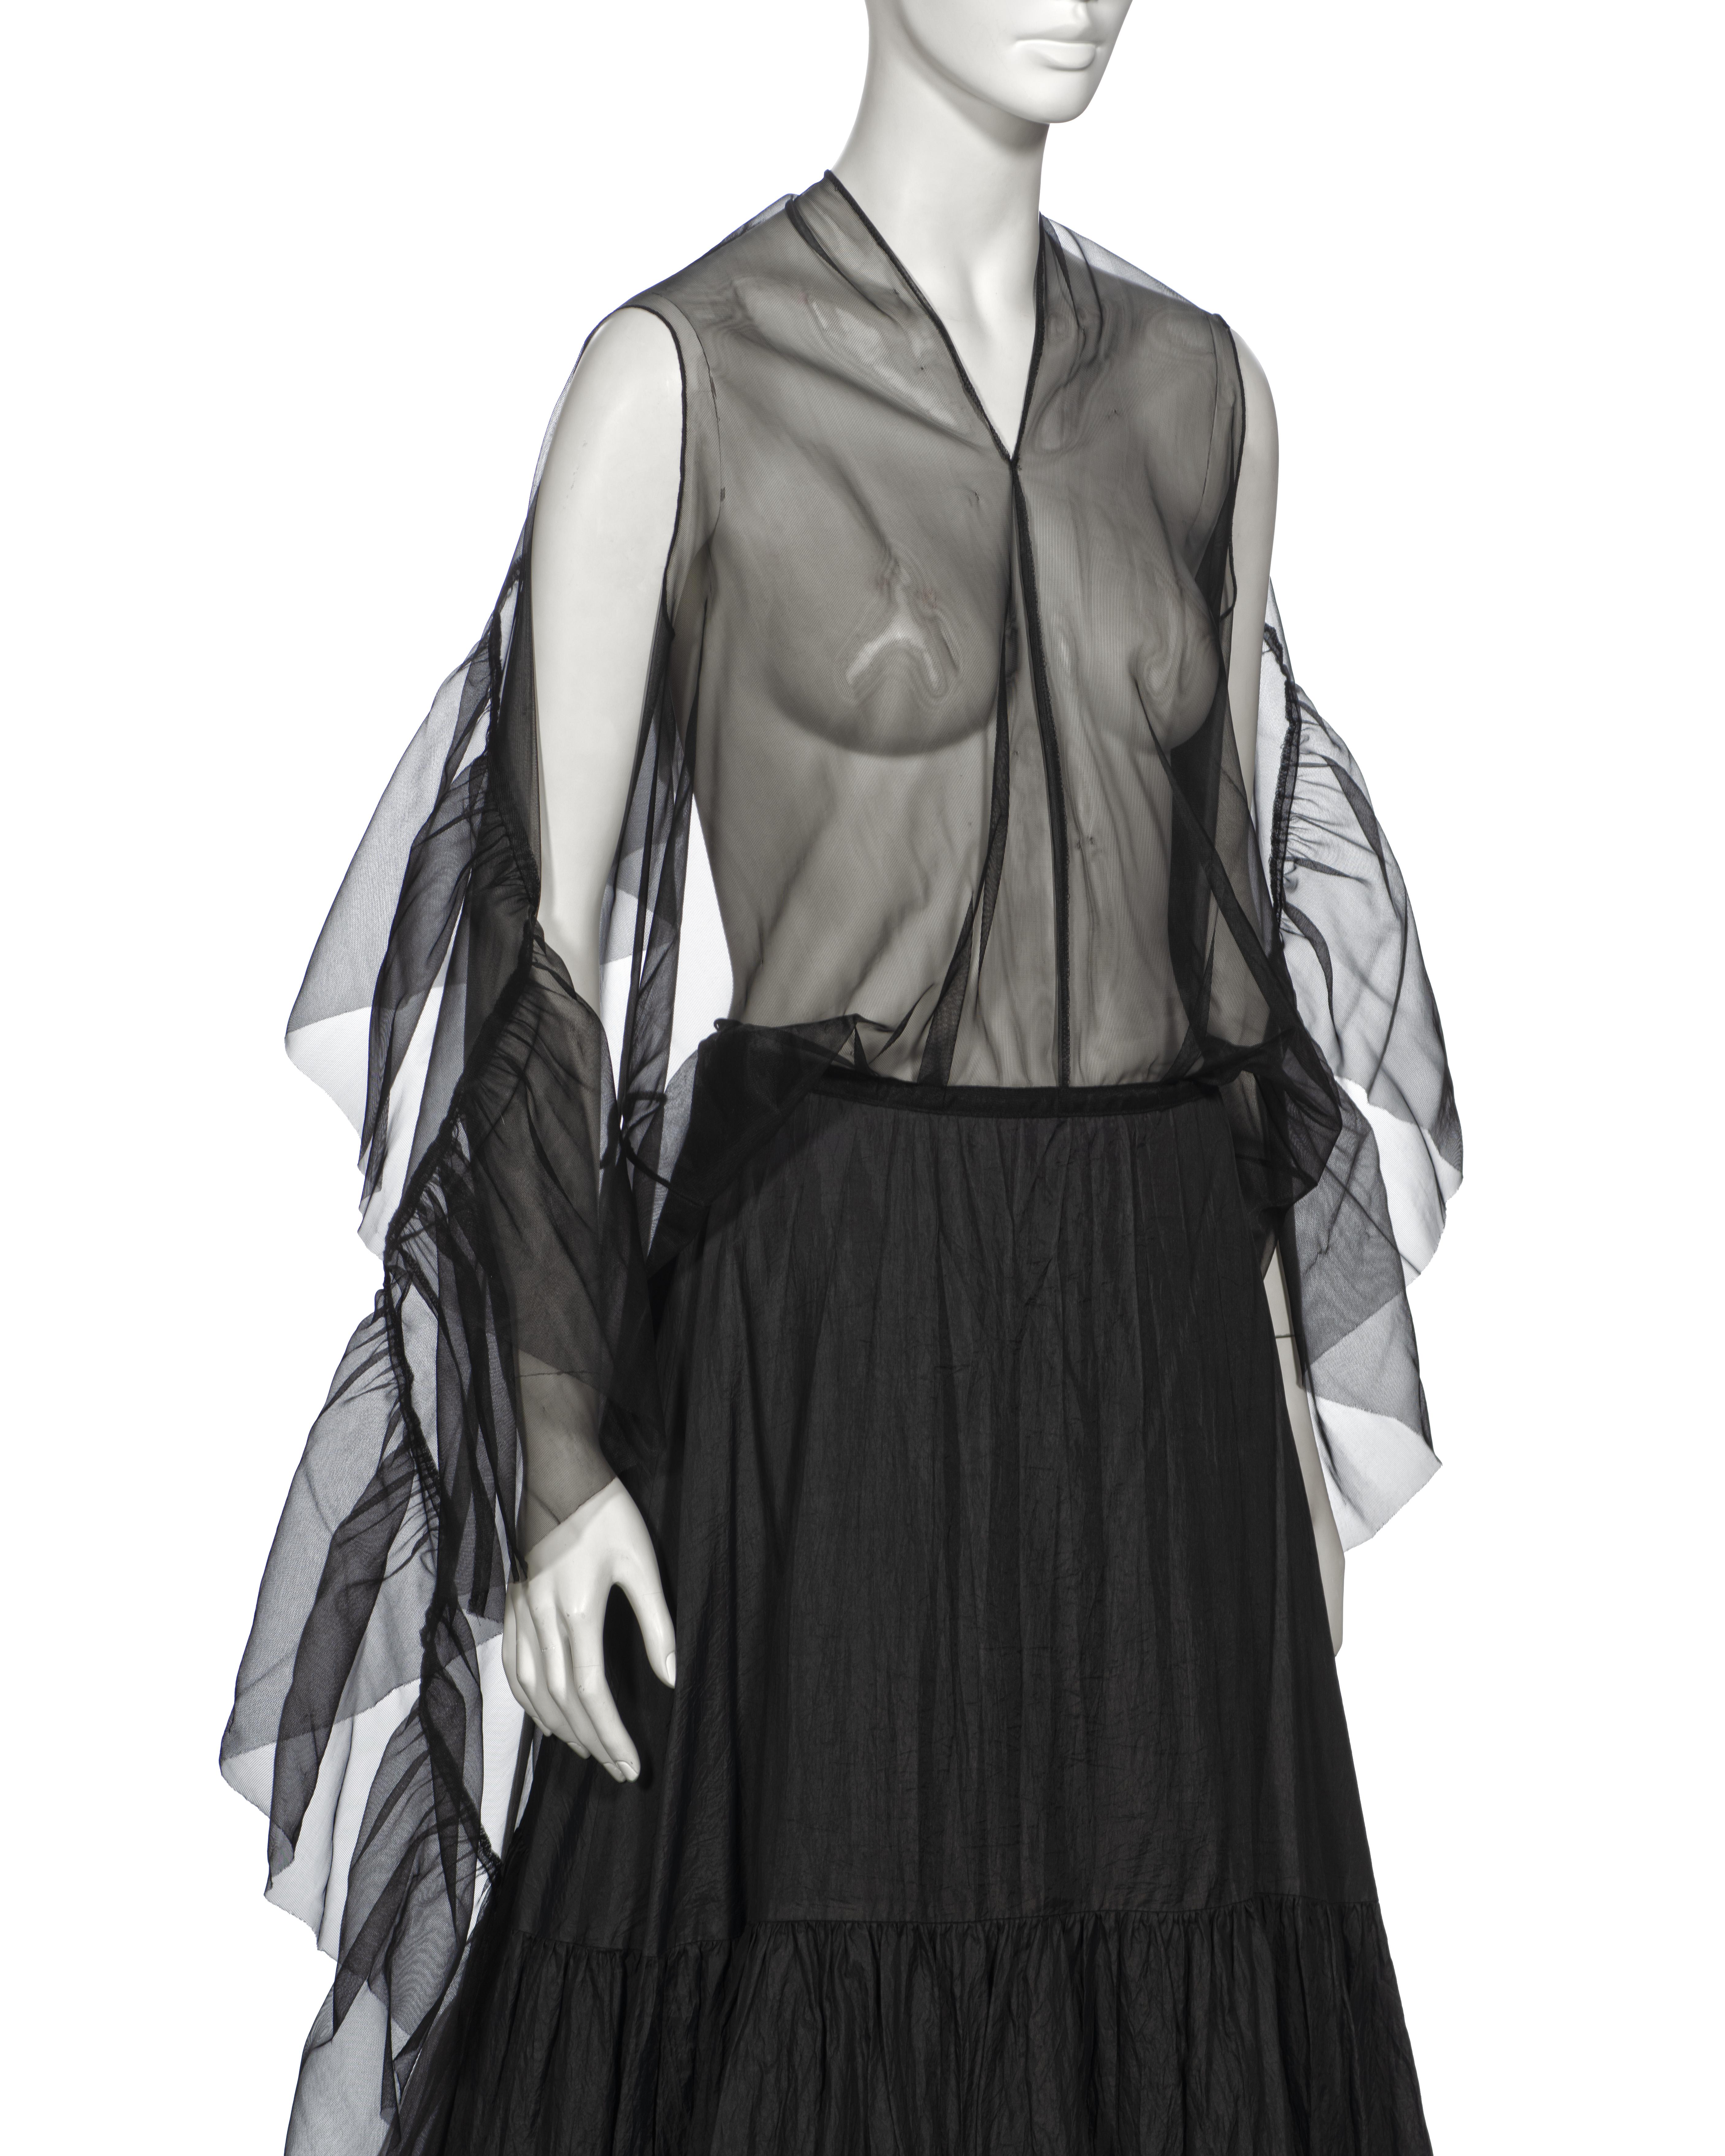 Martin Margiela Artisanal Evening Dress Made Out Of Vintage Petticoats, ss 2003 For Sale 4